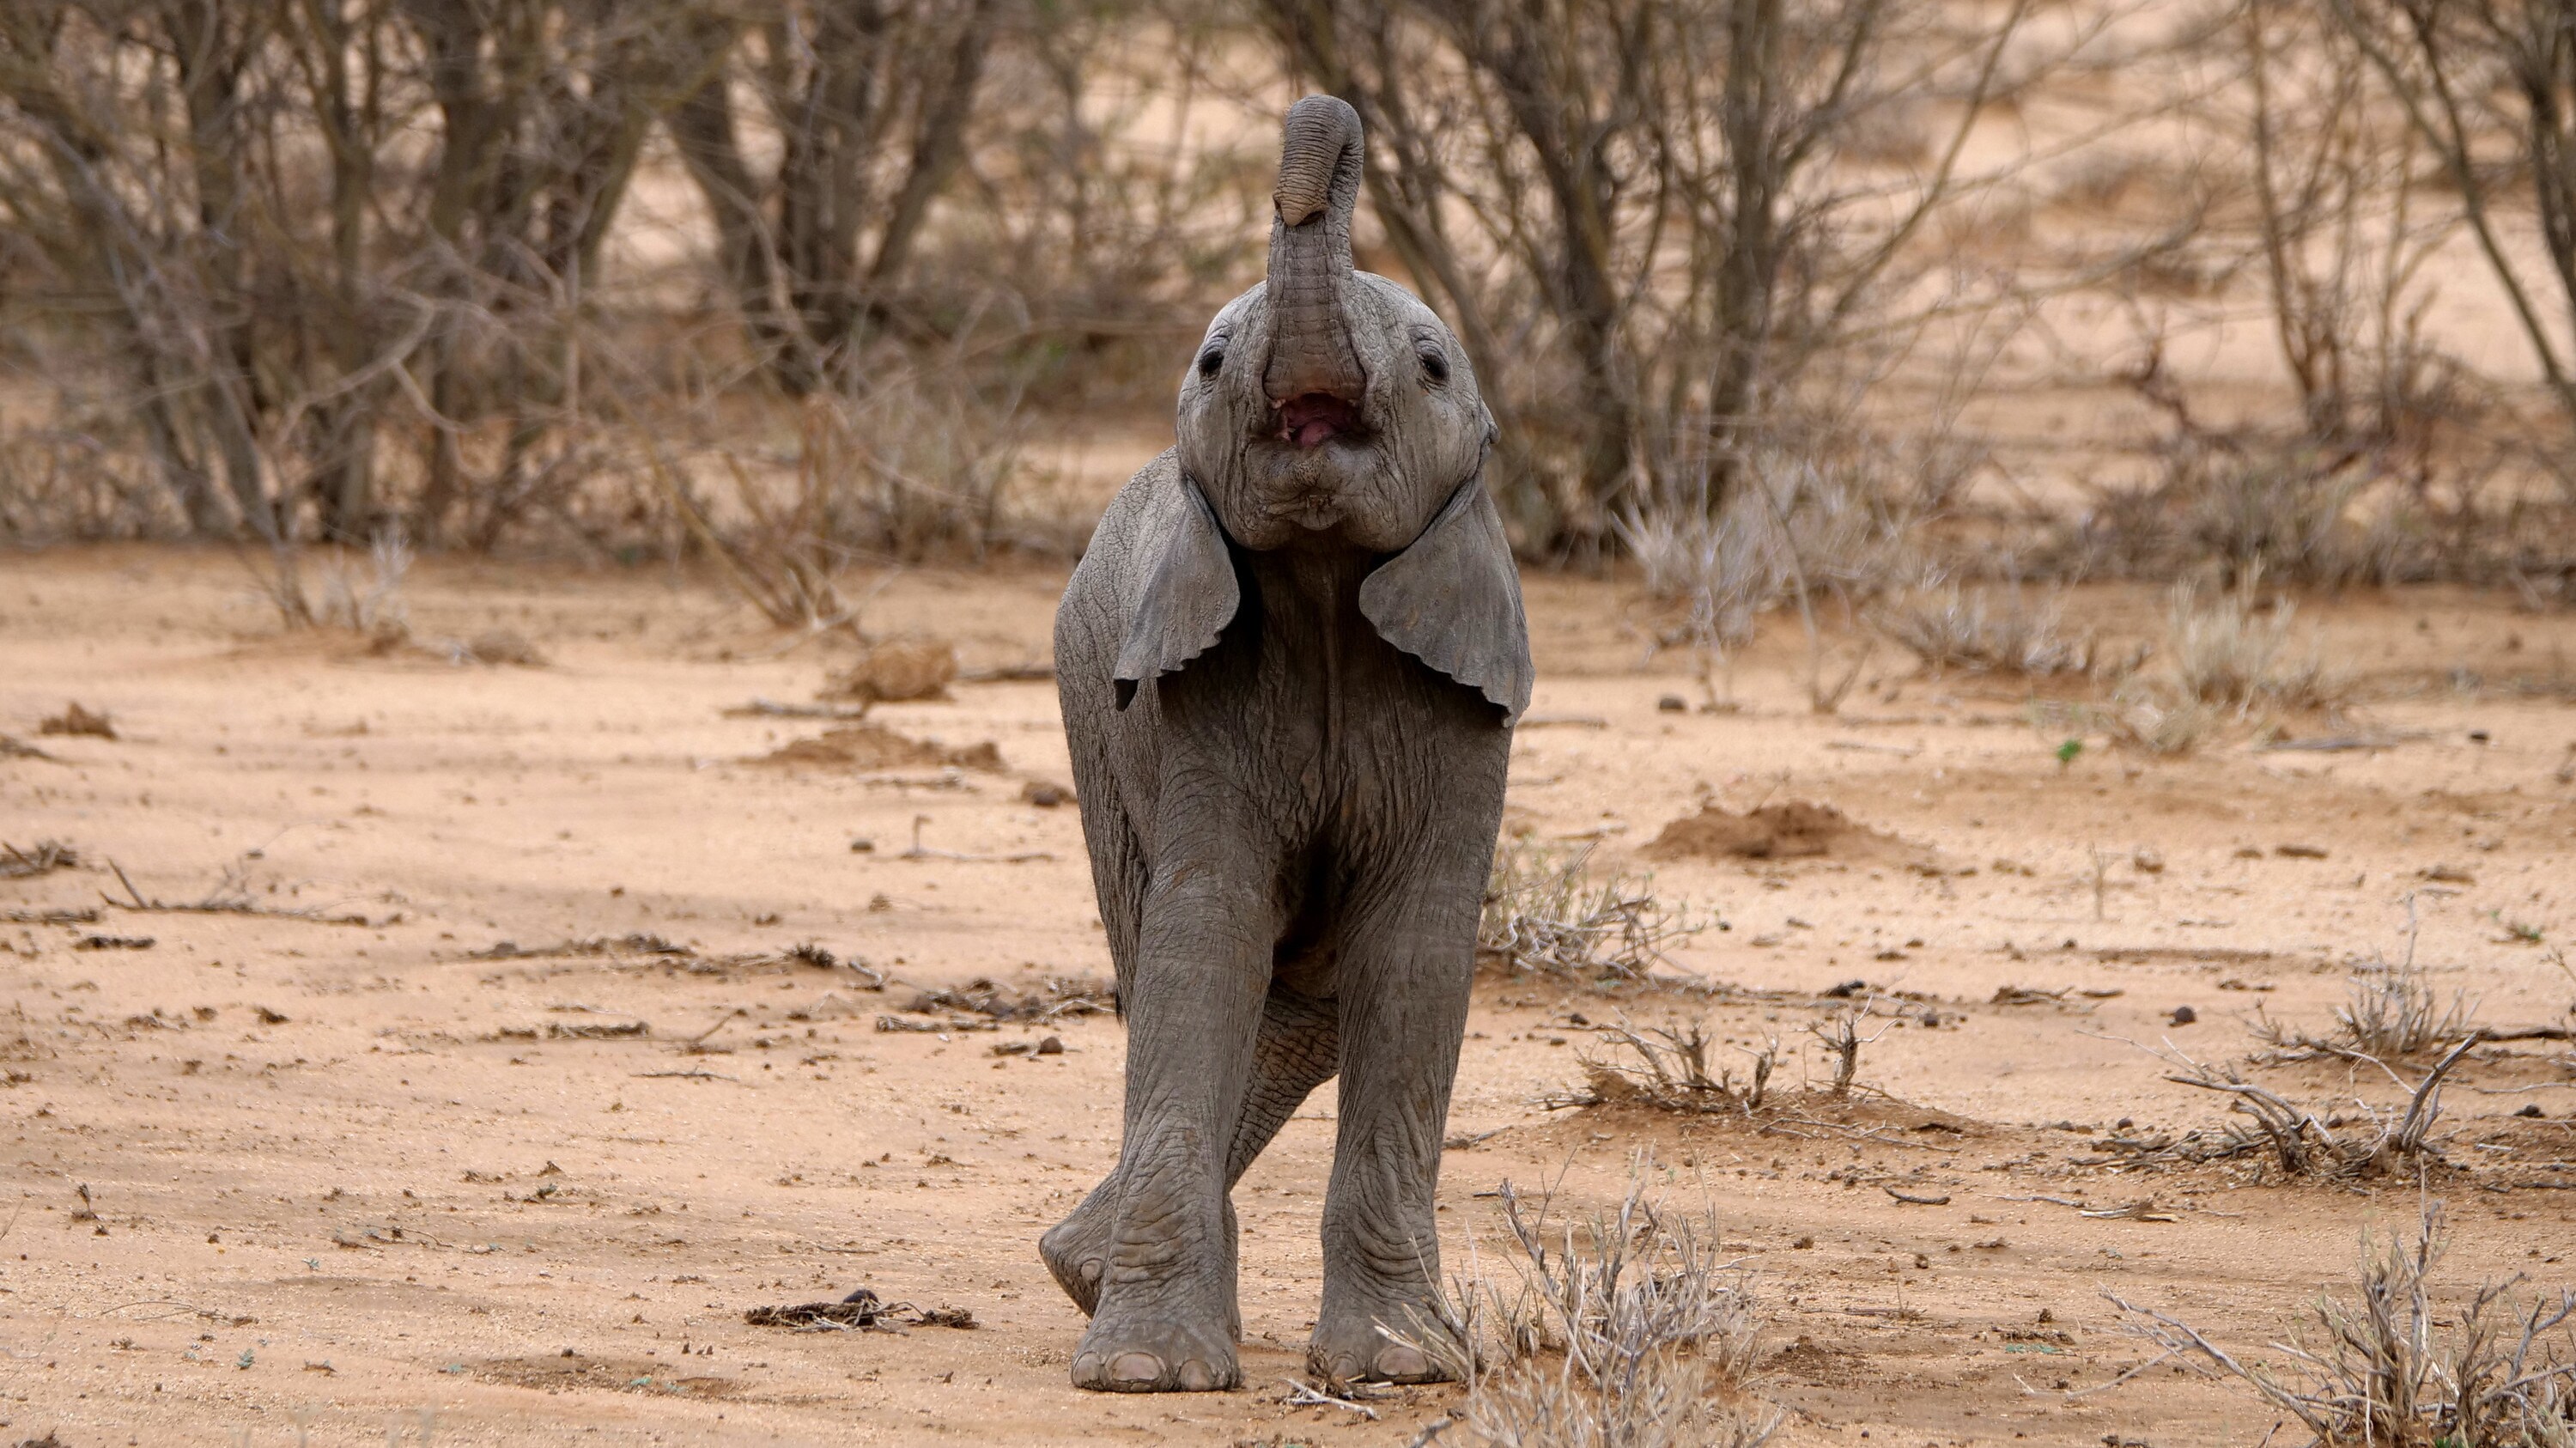 Max raises his trunk. (National Geographic for Disney+/Melanie Gerry)